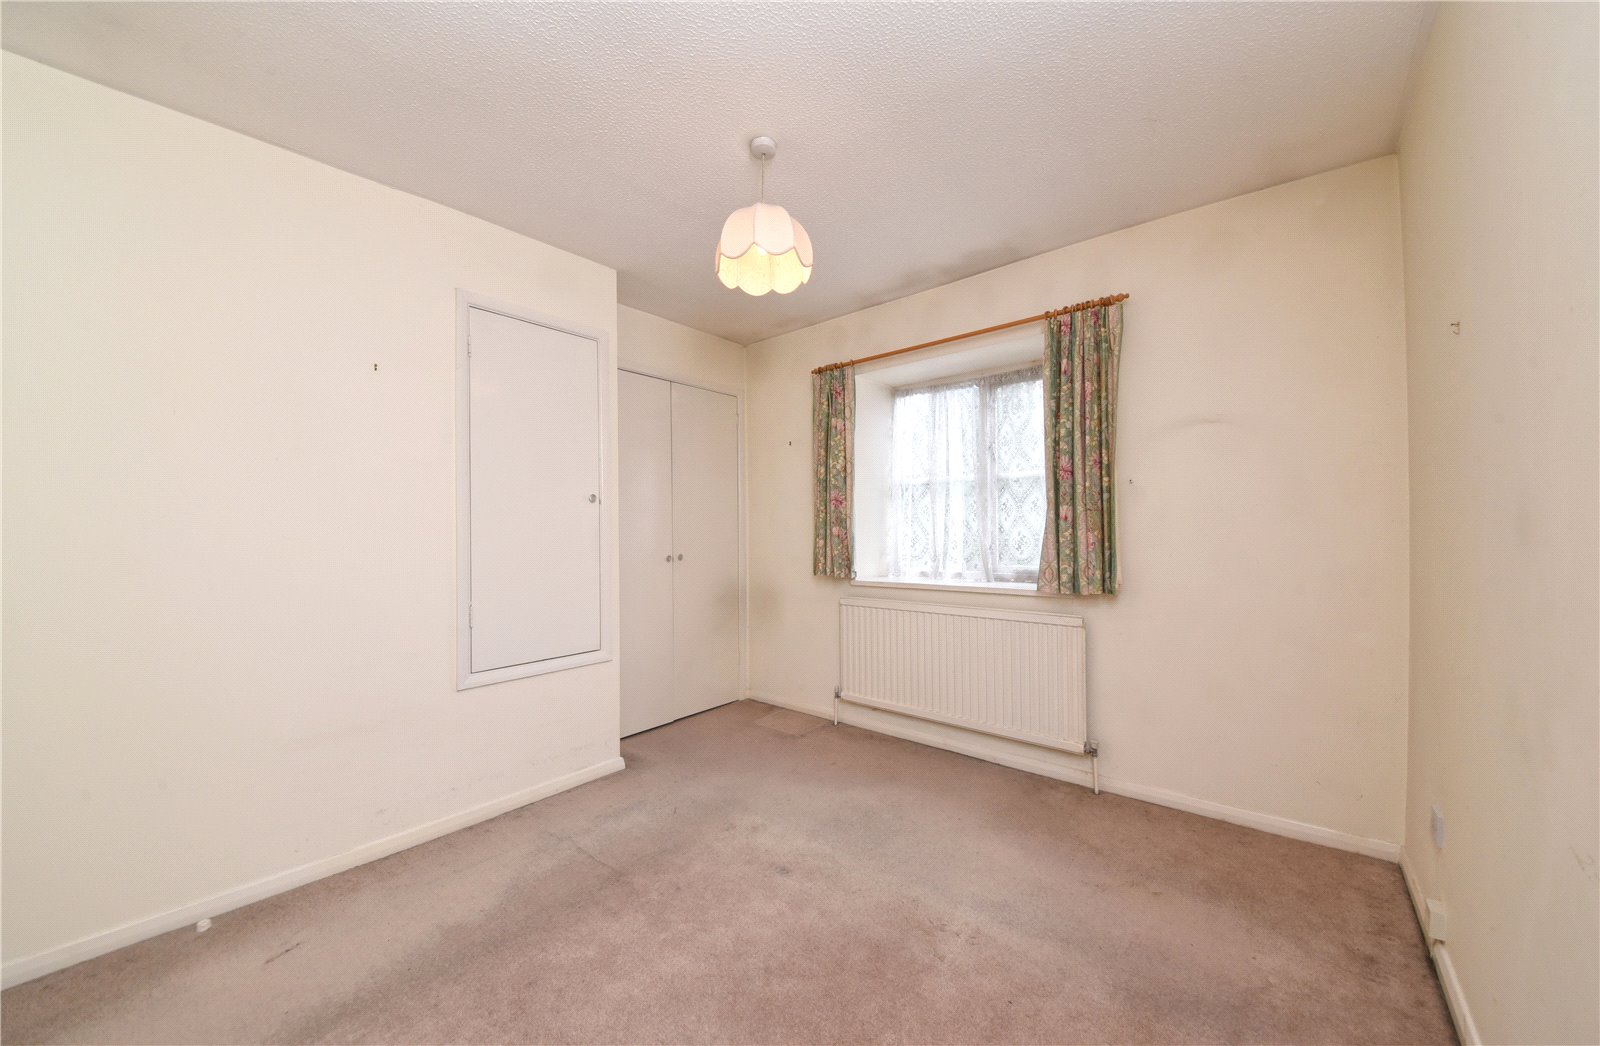 2 bed house for sale in Boleyn Way, New Barnet  - Property Image 10